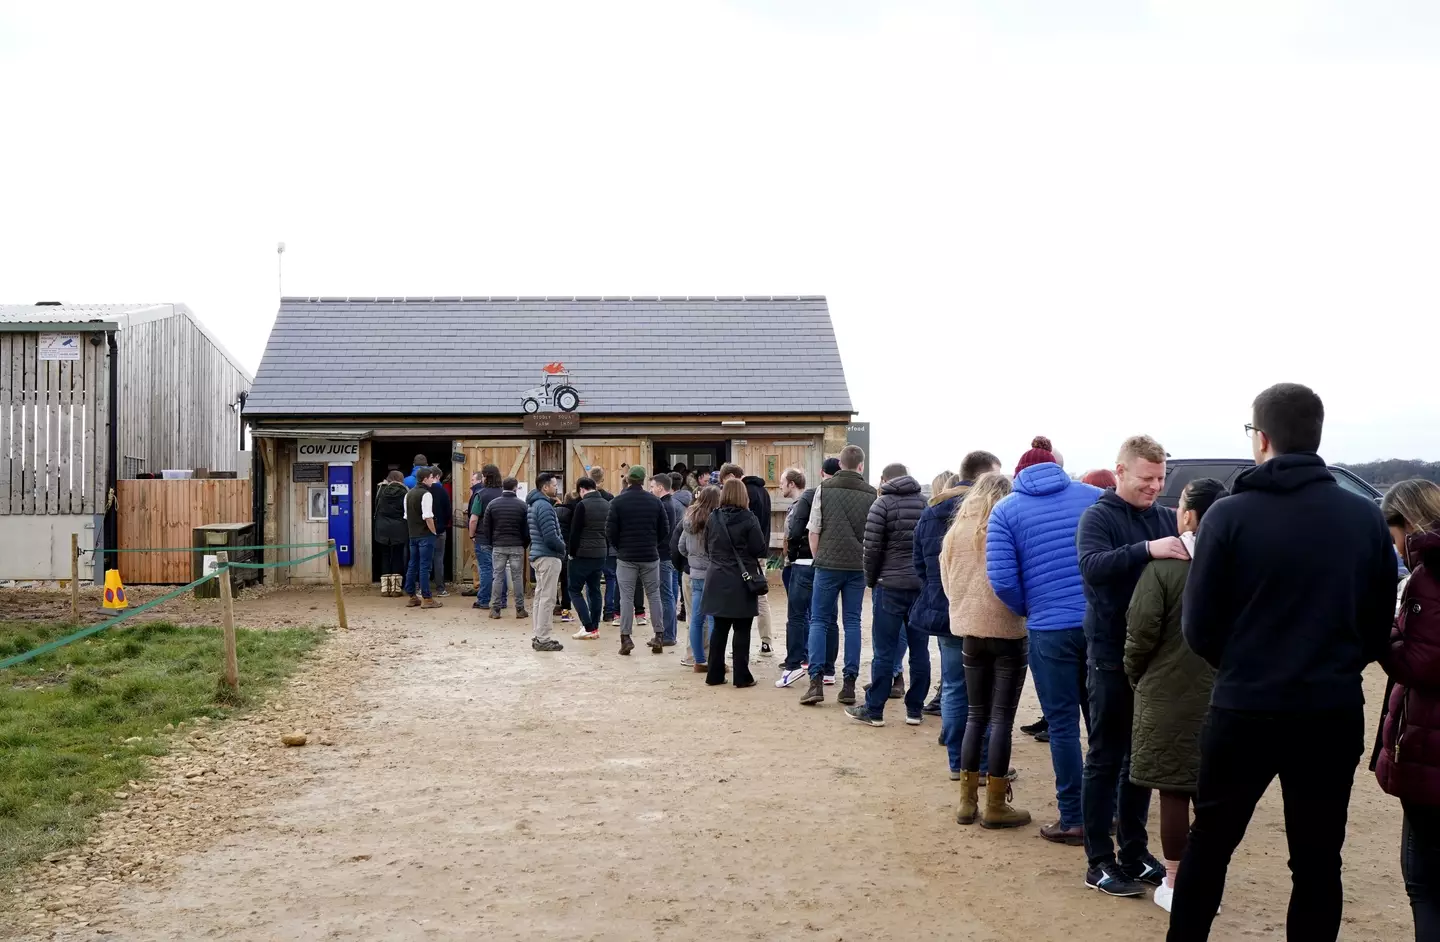 The queues are much bigger now than when this was taken in 2023 (Gareth Fuller / PA Wire)